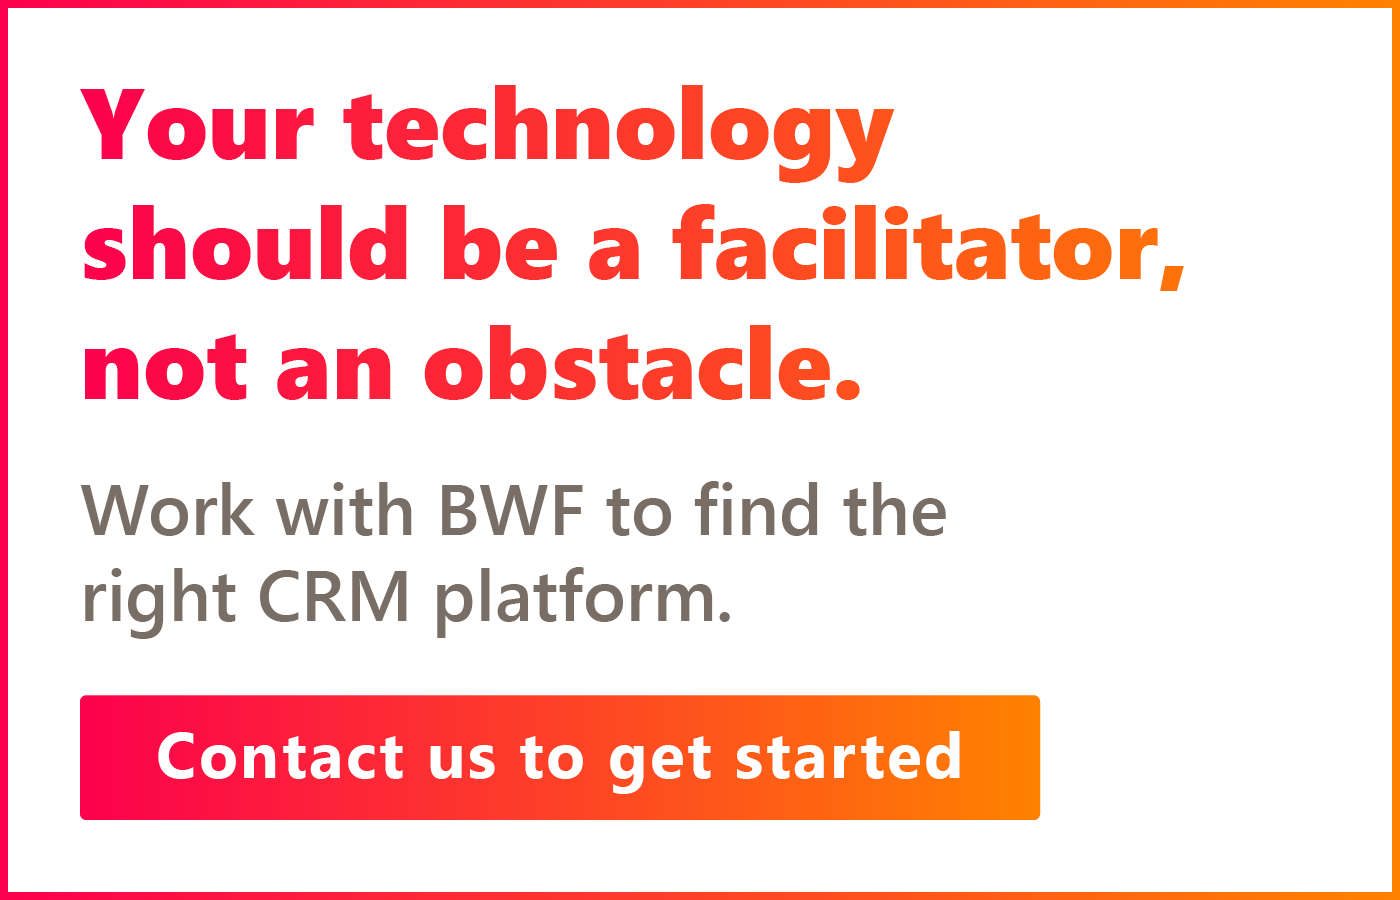 Work with BWF to find the right CRM platform. Contact us to get started.